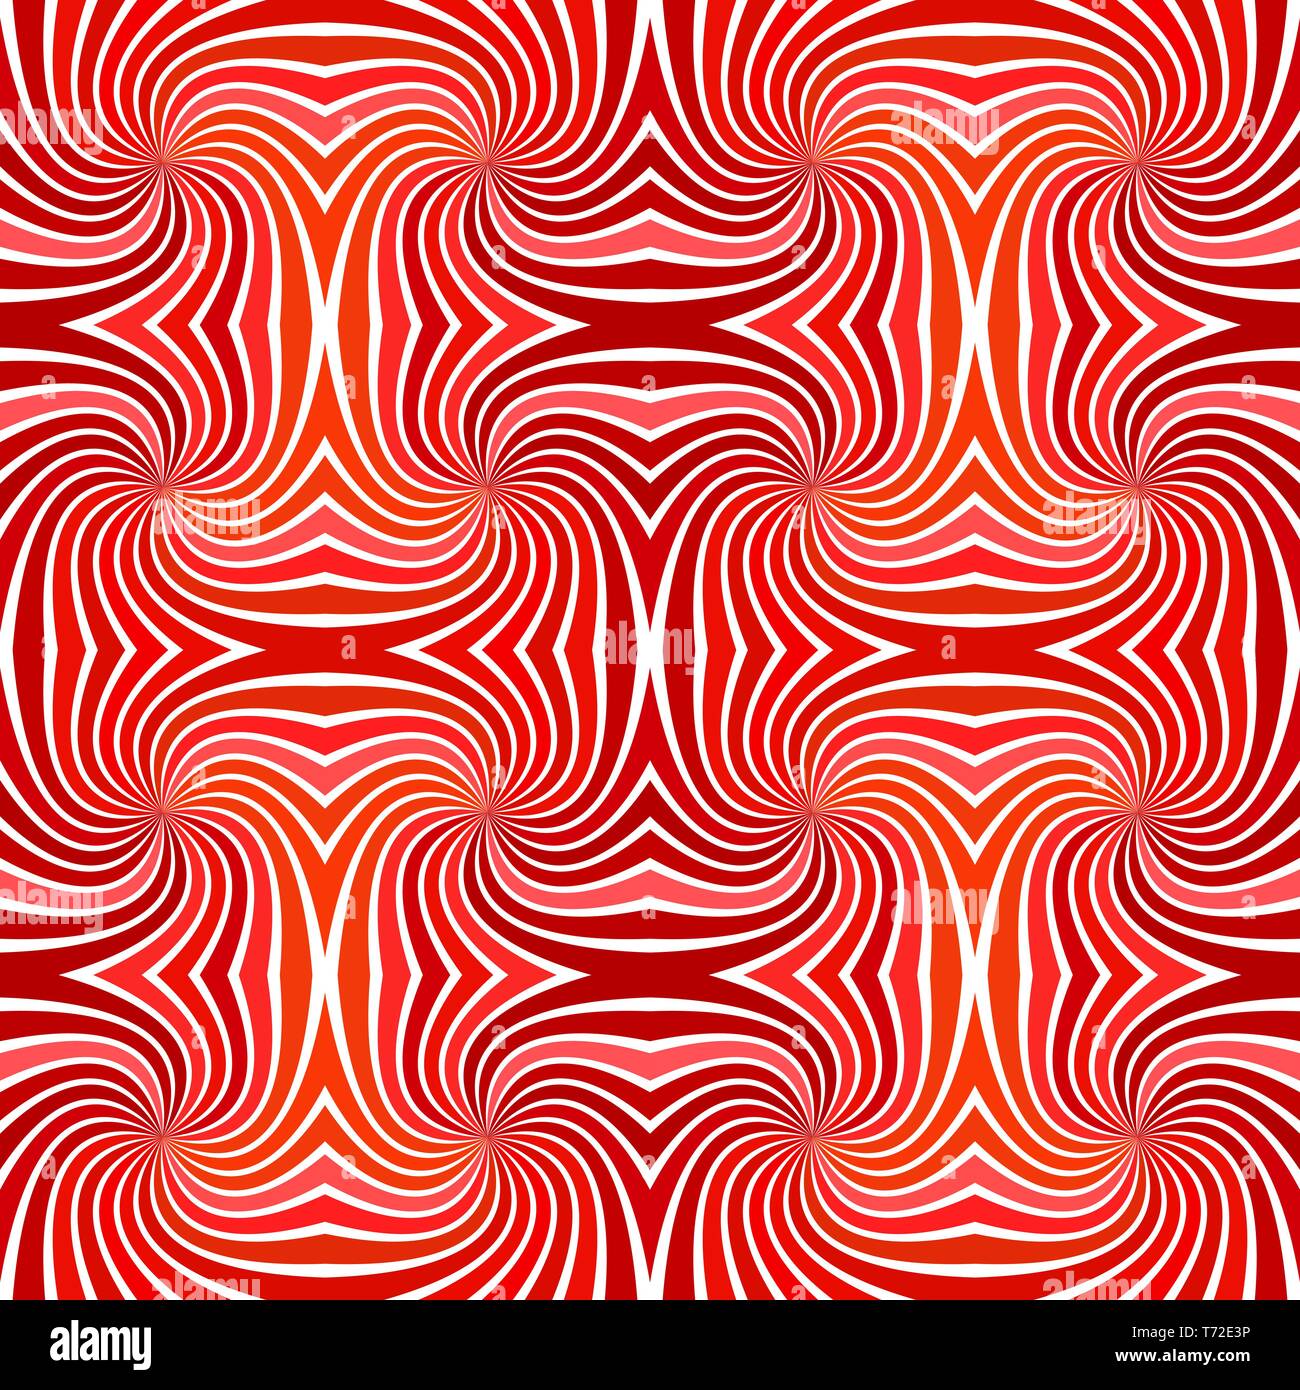 Red abstract psychedelic seamless striped spiral pattern background design Stock Vector